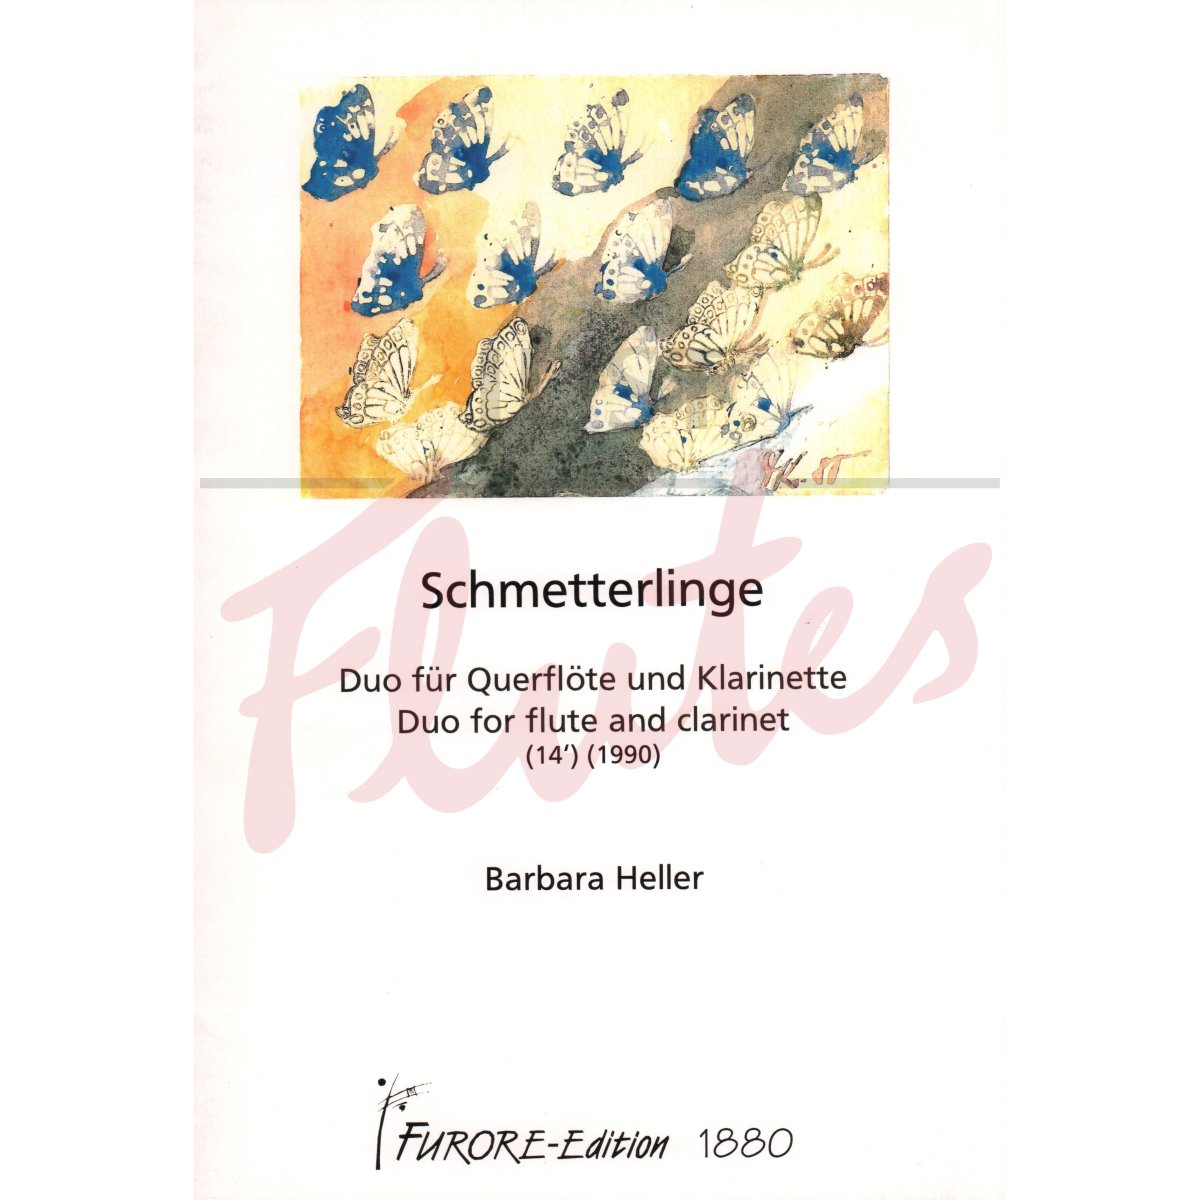 Schmetterlinge (Butterflies) for Flute and Clarinet